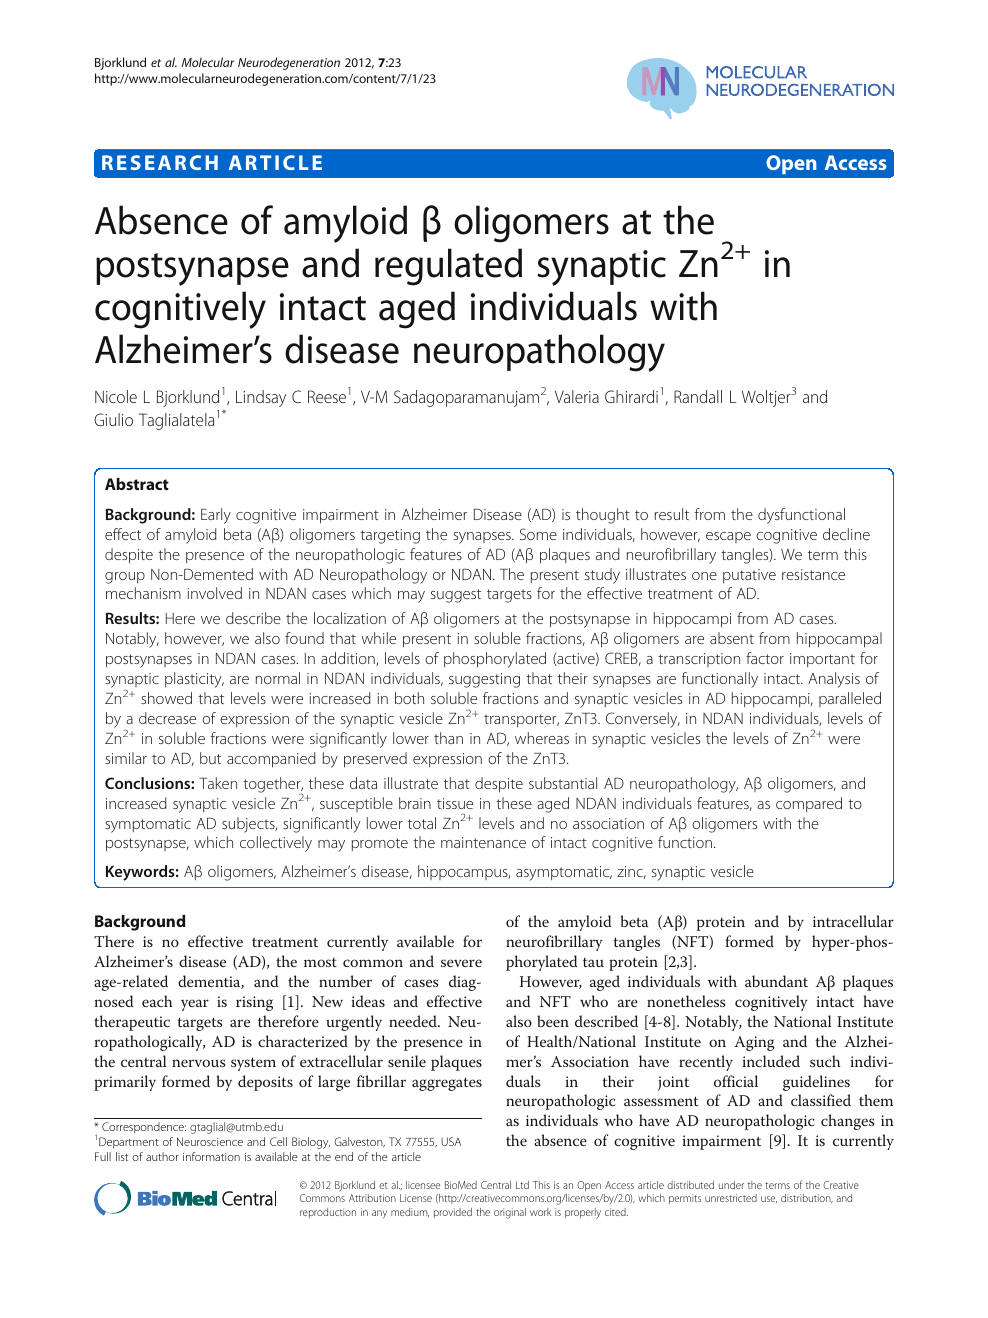 Absence Of Amyloid B Oligomers At The Postsynapse And Regulated Synaptic Zn2 In Cognitively Intact Aged Individuals With Alzheimer S Disease Neuropathology Topic Of Research Paper In Biological Sciences Download Scholarly Article